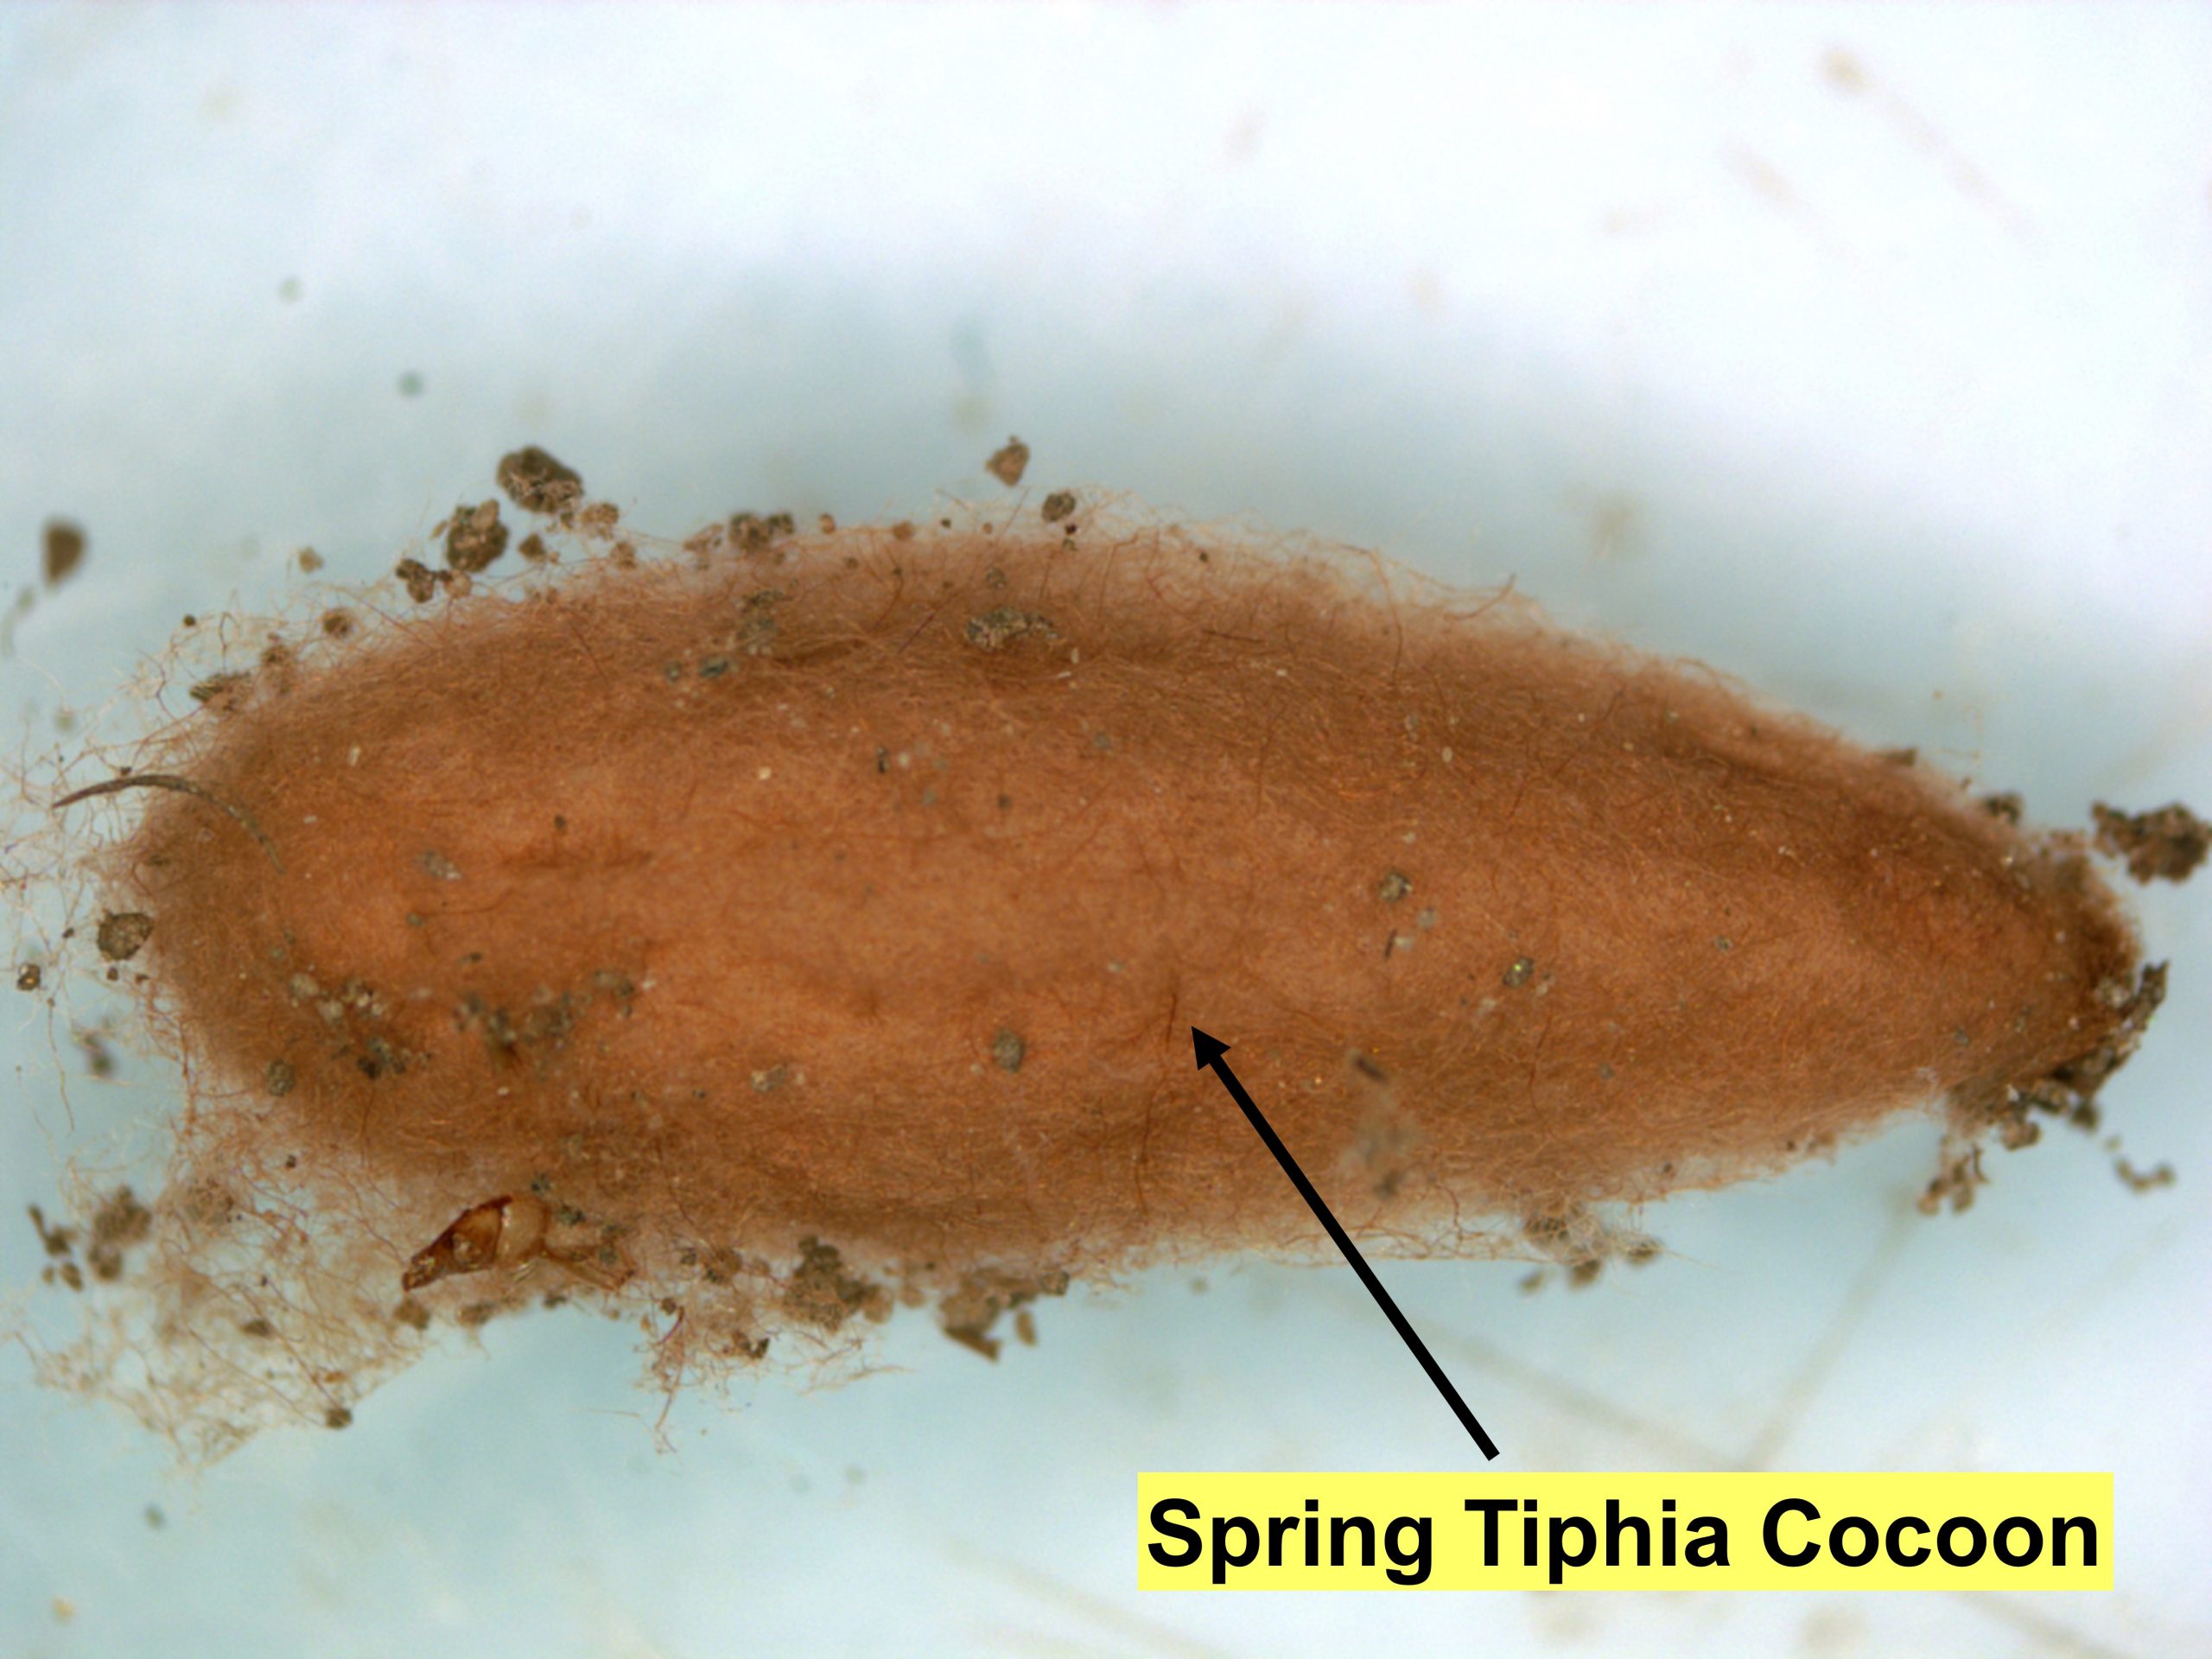 Spring Tiphia cocoon with label